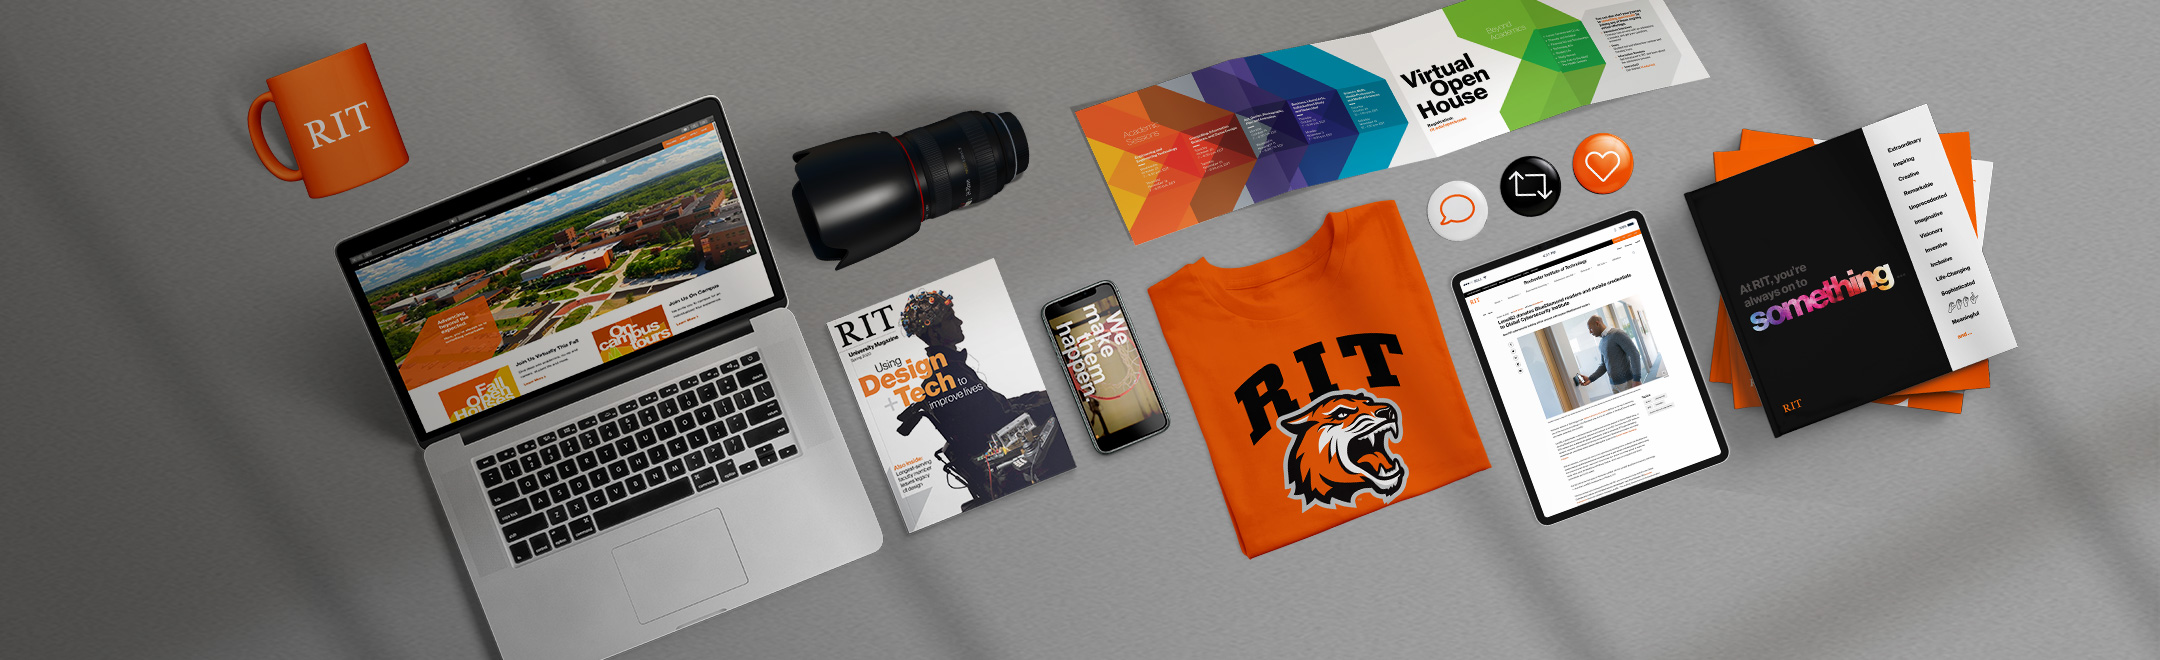 RIT branded items including a laptop, shirt, magazine, tablet, and notebook